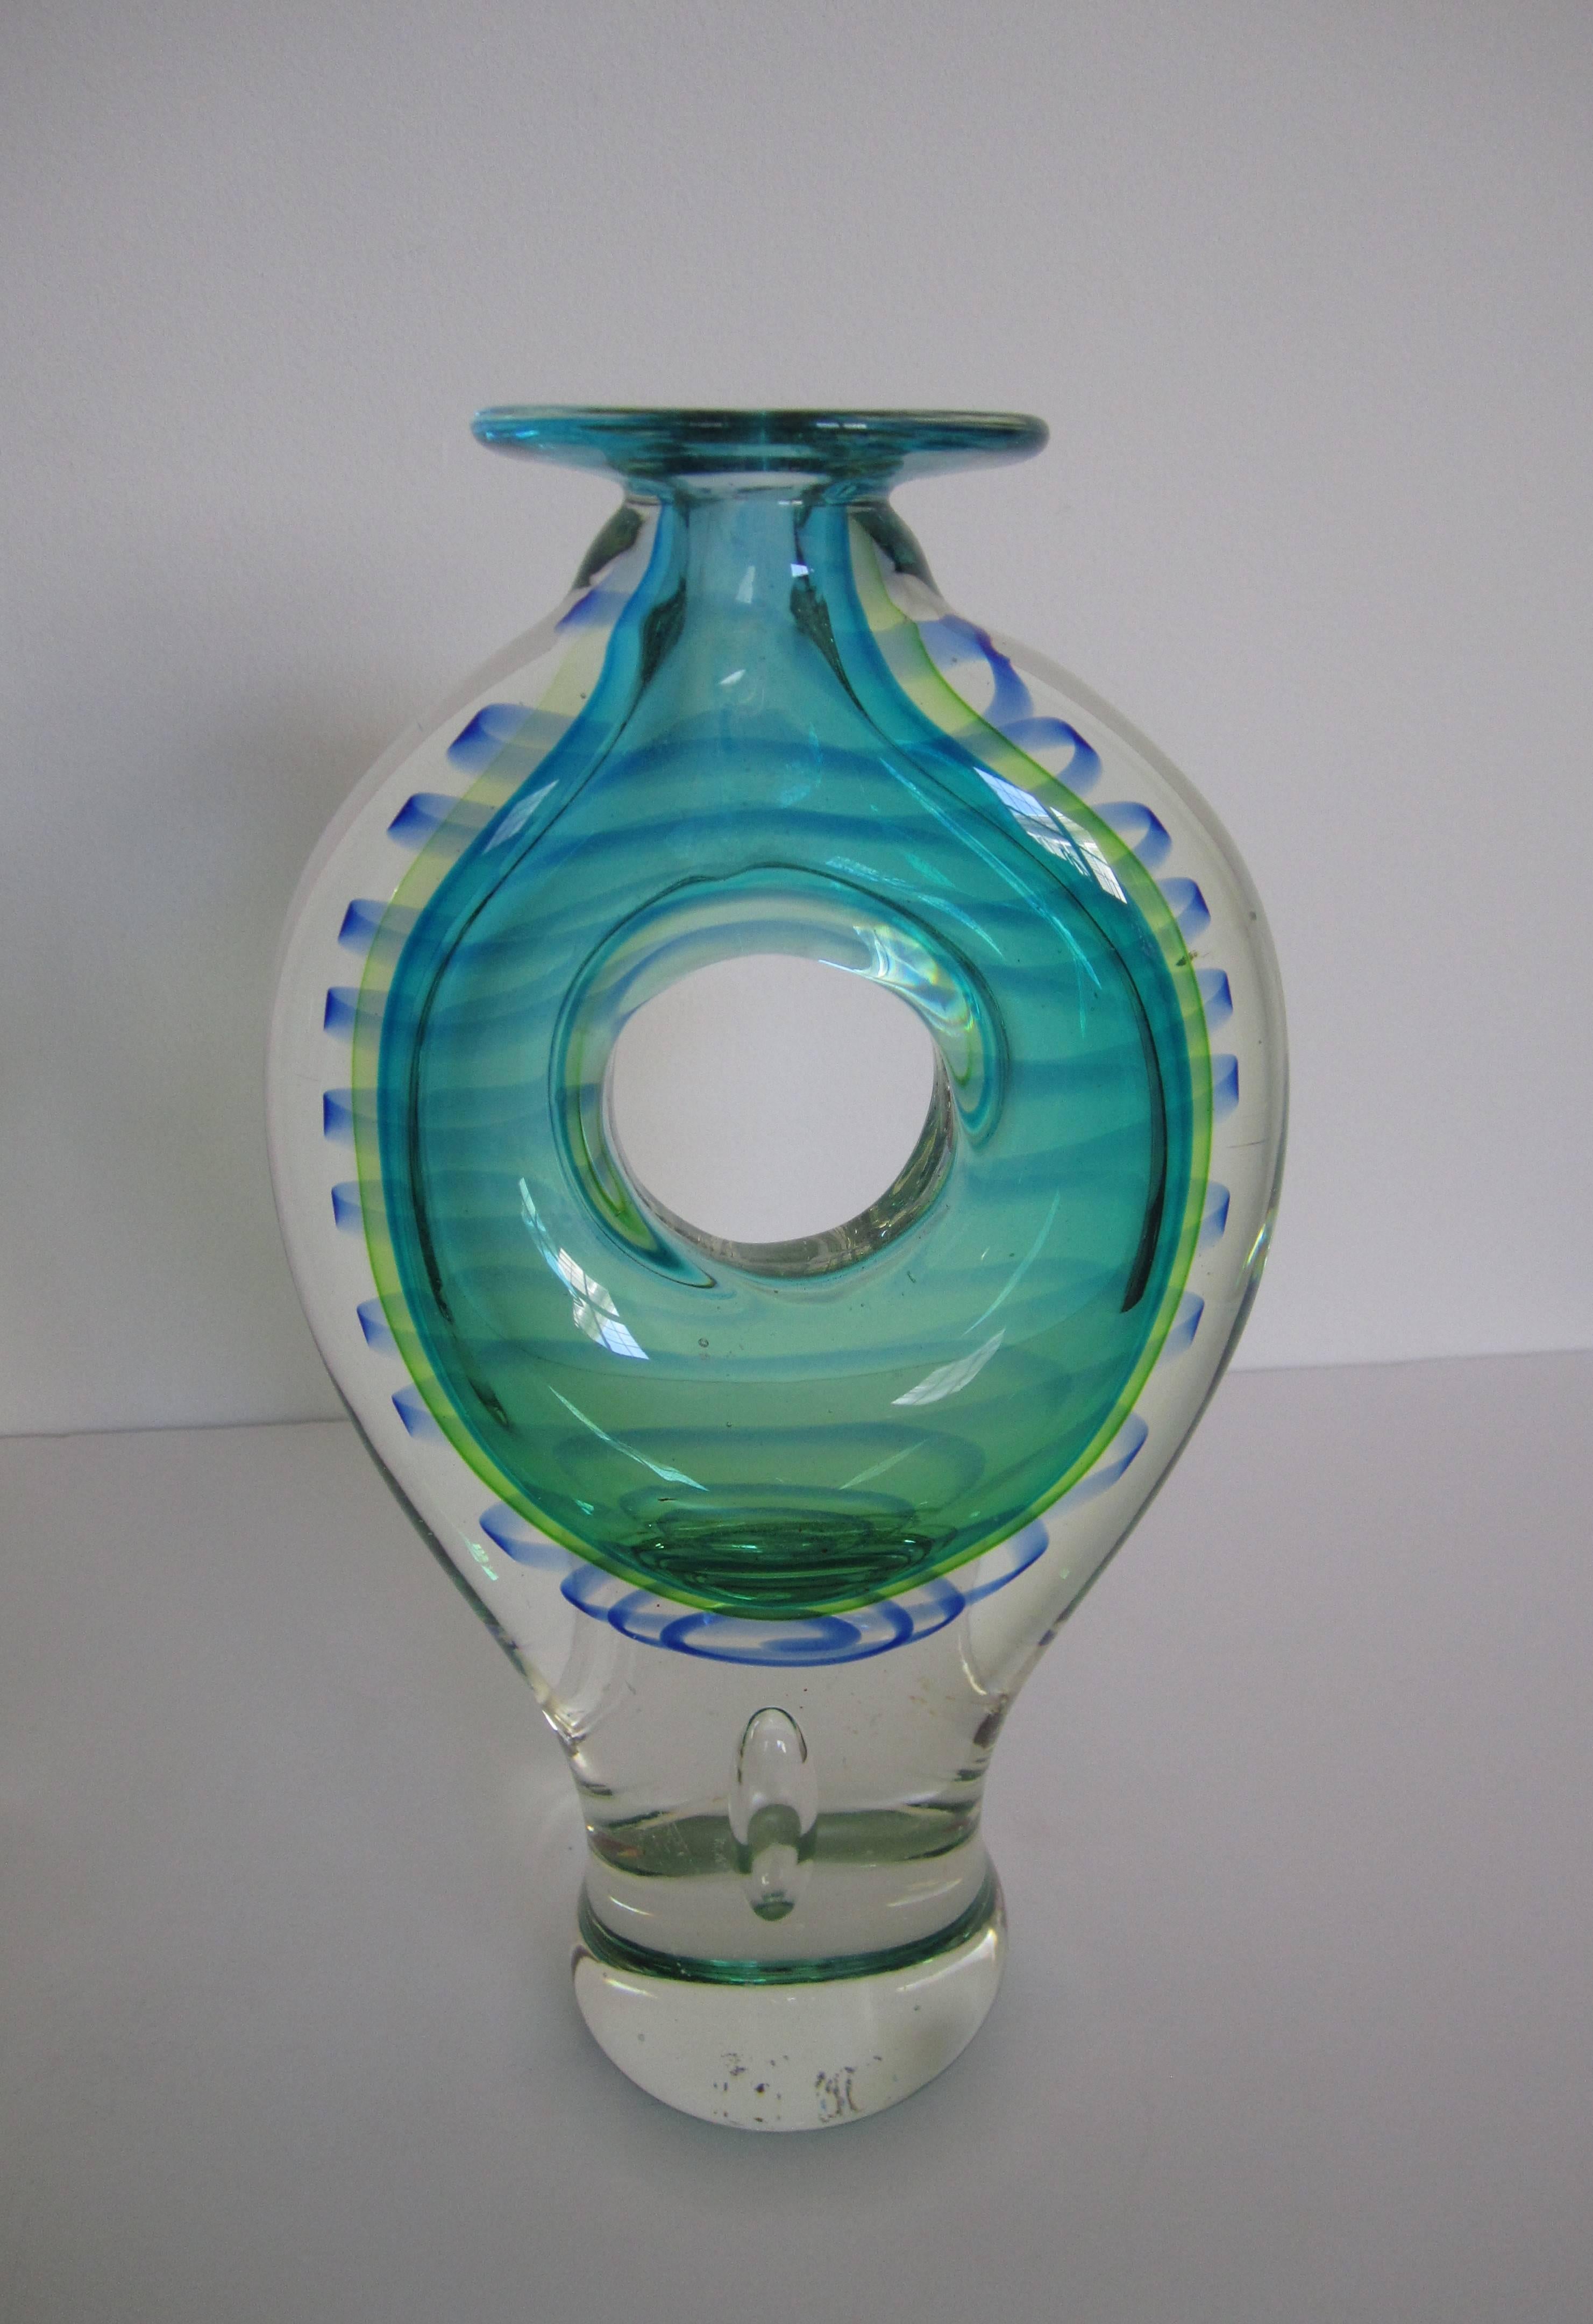 20th Century Pair of Modern Blue and Green Art Glass Vessels or Vases